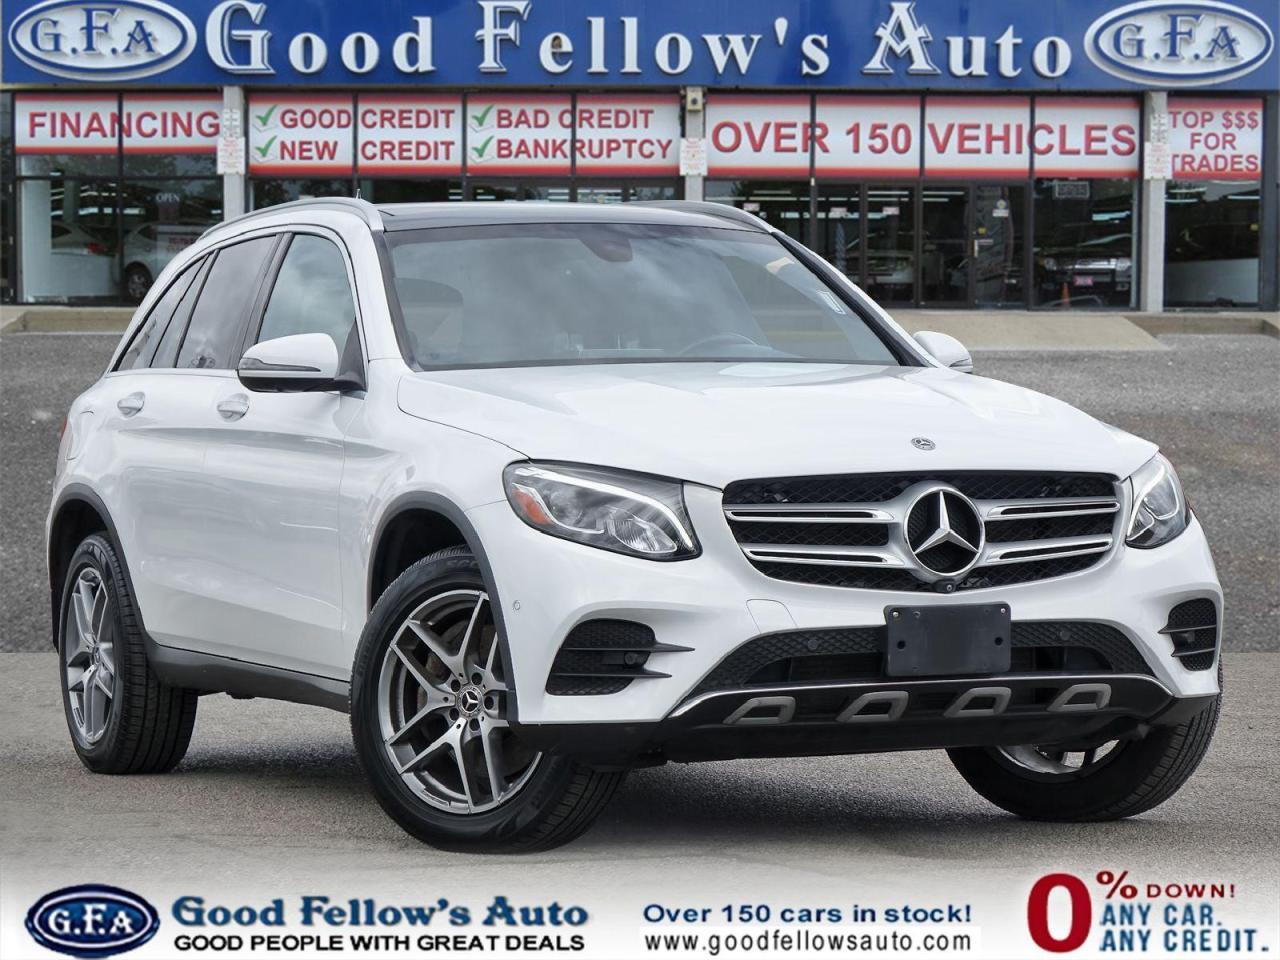 2019 Mercedes-Benz GL-Class 4MATIC, AMG PACKAGE, LEATHER SEATS, PANORAMIC ROOF